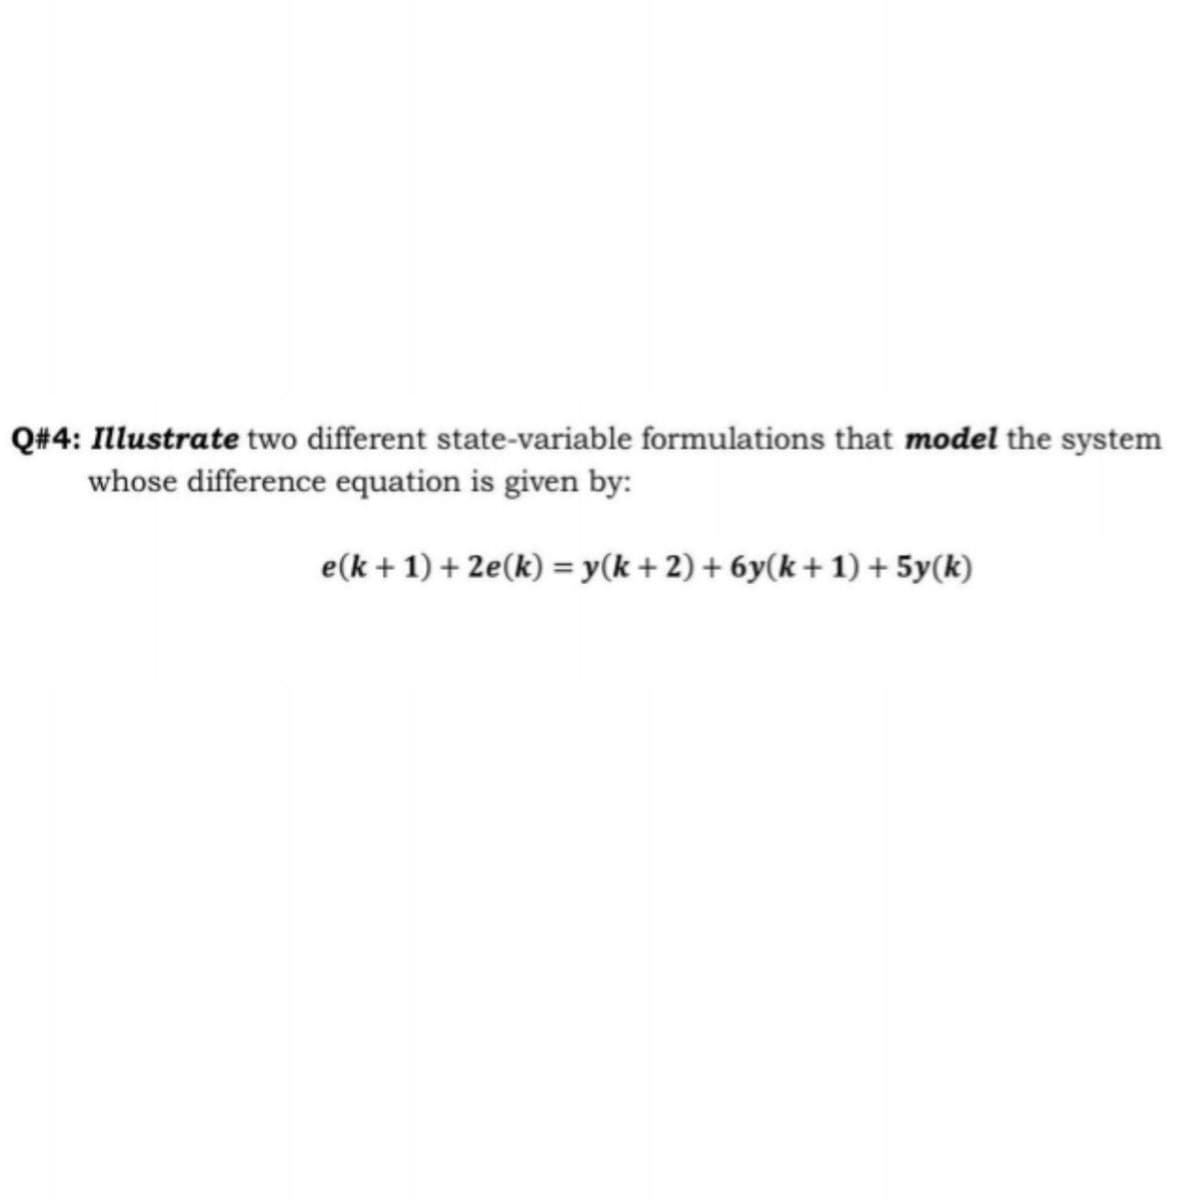 Q#4: Illustrate two different state-variable formulations that model the system
whose difference equation is given by:
e(k + 1) + 2e(k) = y(k + 2) + 6y(k+1) + 5y(k)
